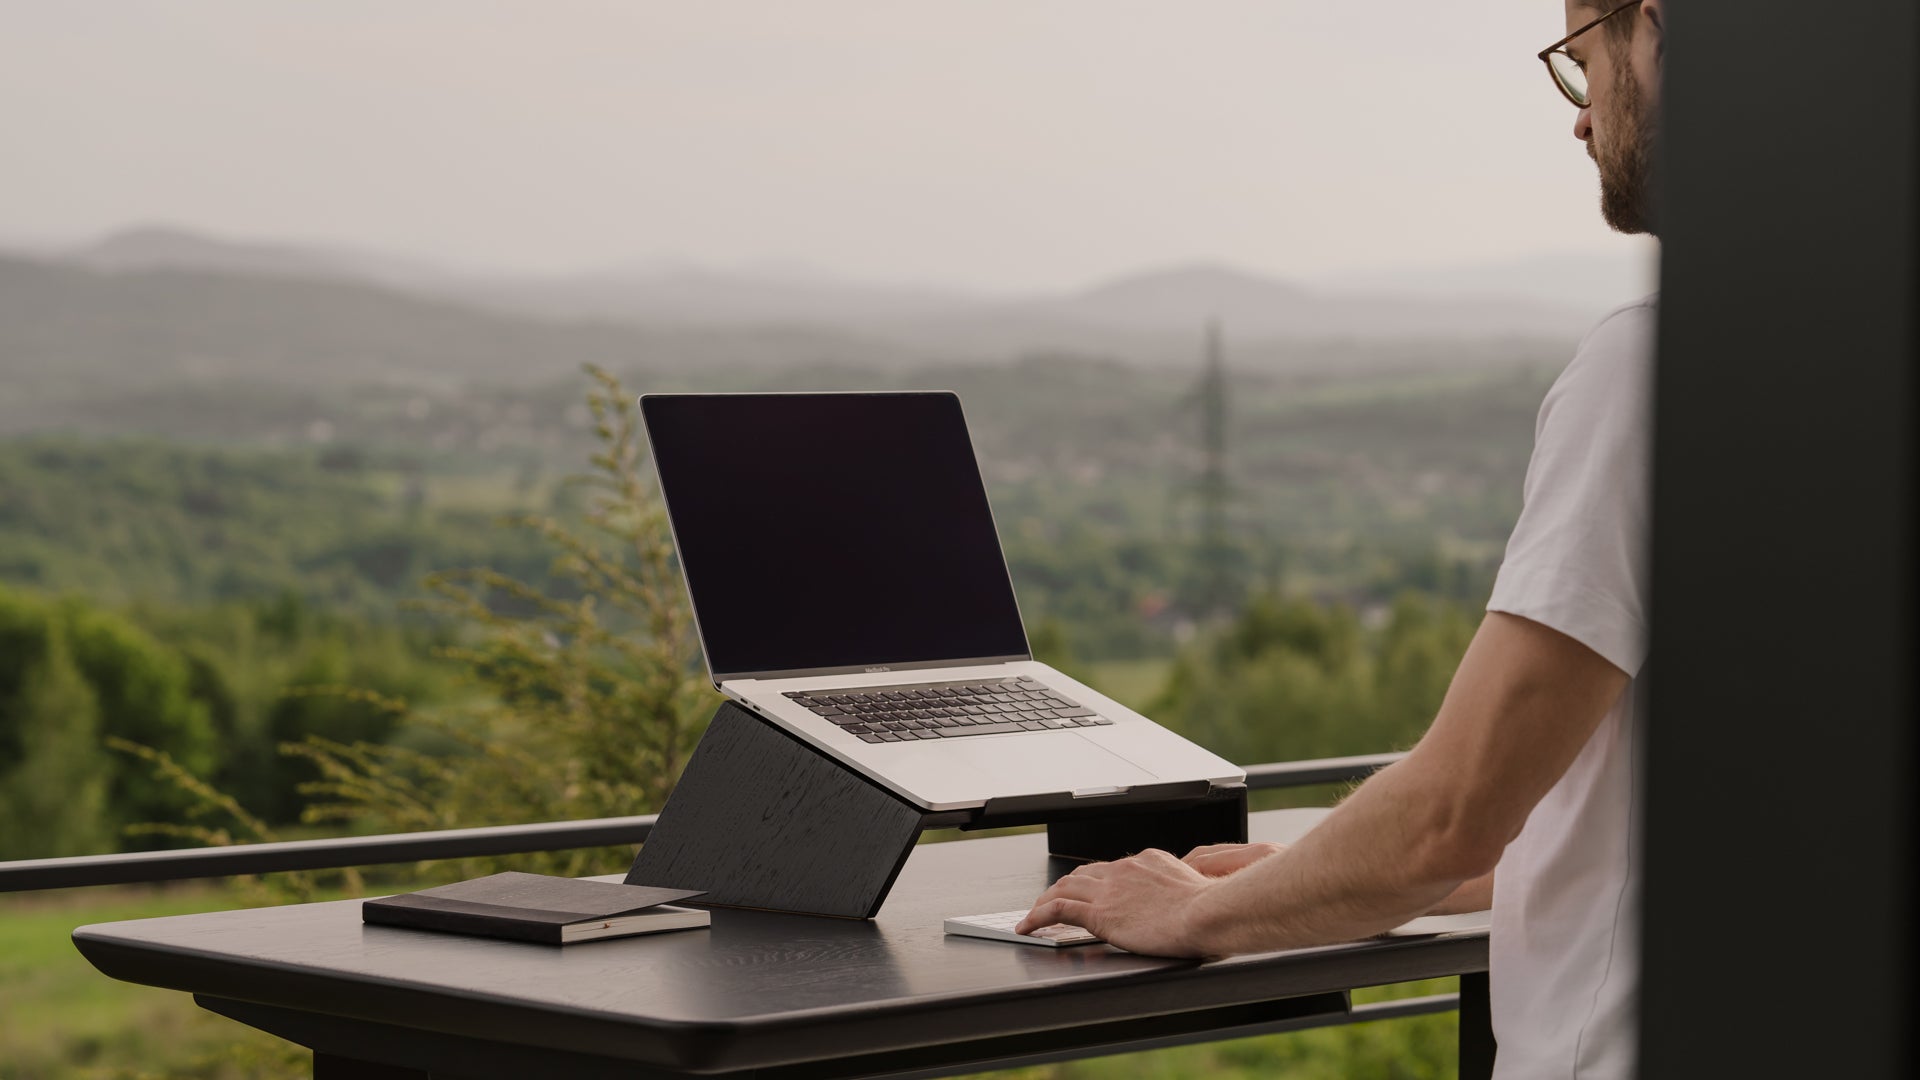 Your workspace. Anywhere.